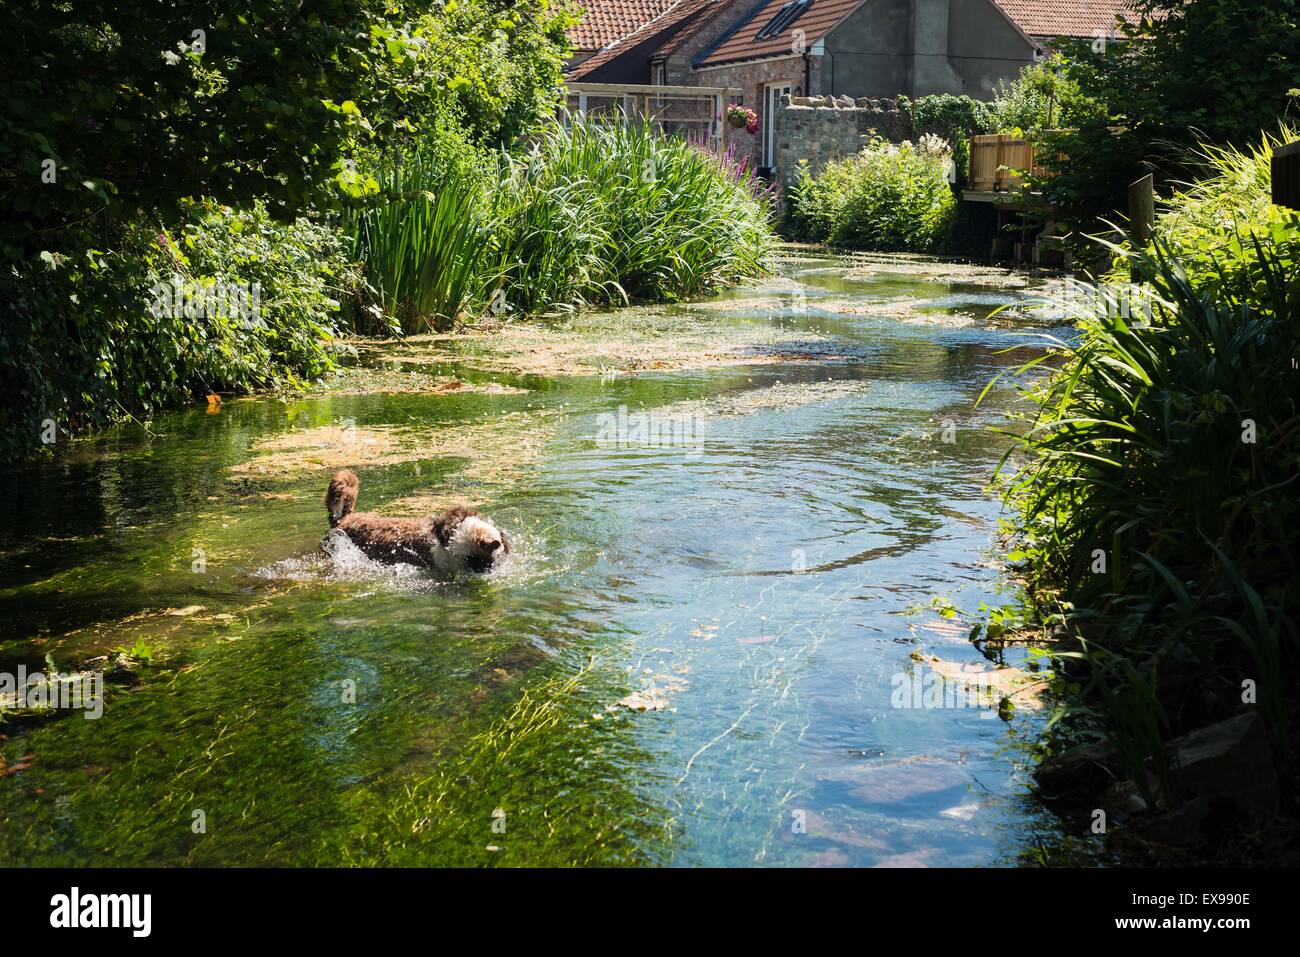 Spanish water dog in river during summer heat Stock Photo